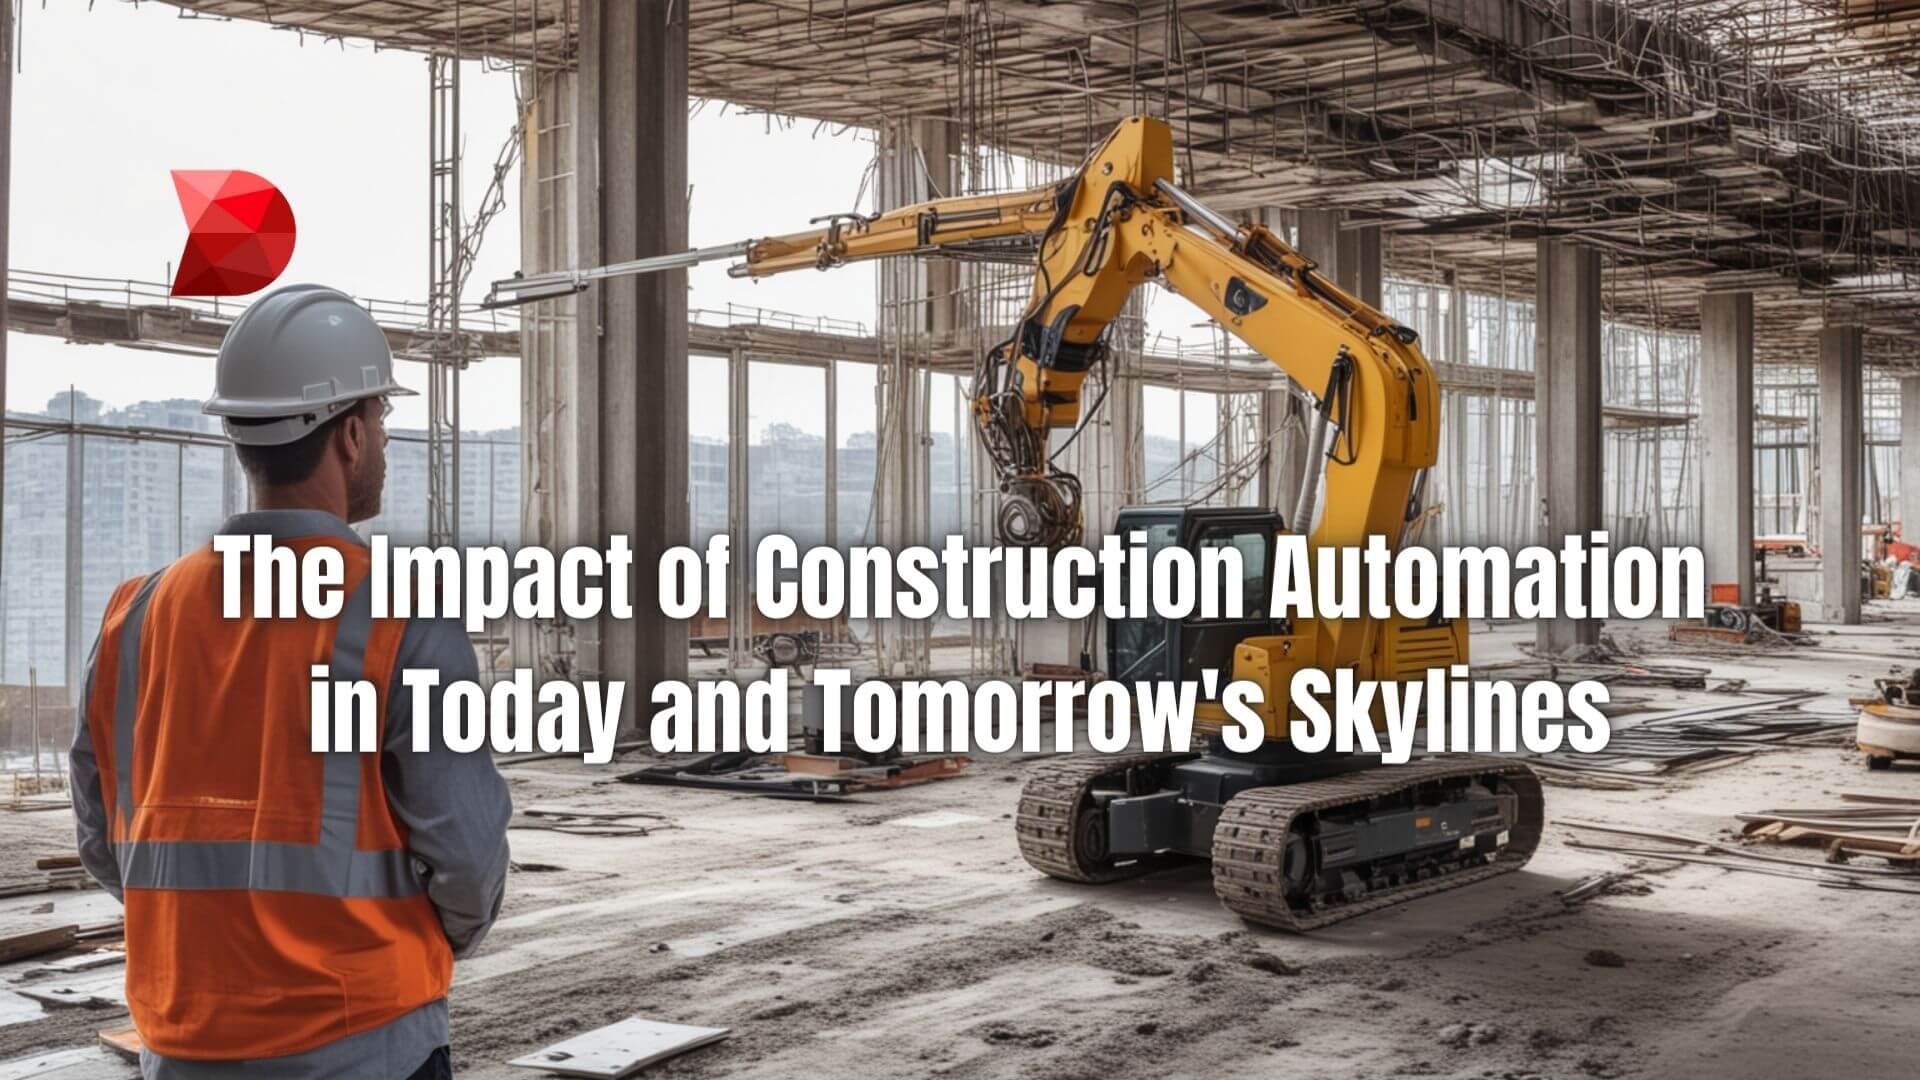 Explore the transformative power of construction automation in shaping urban landscapes. Click here to discover the future skyline.